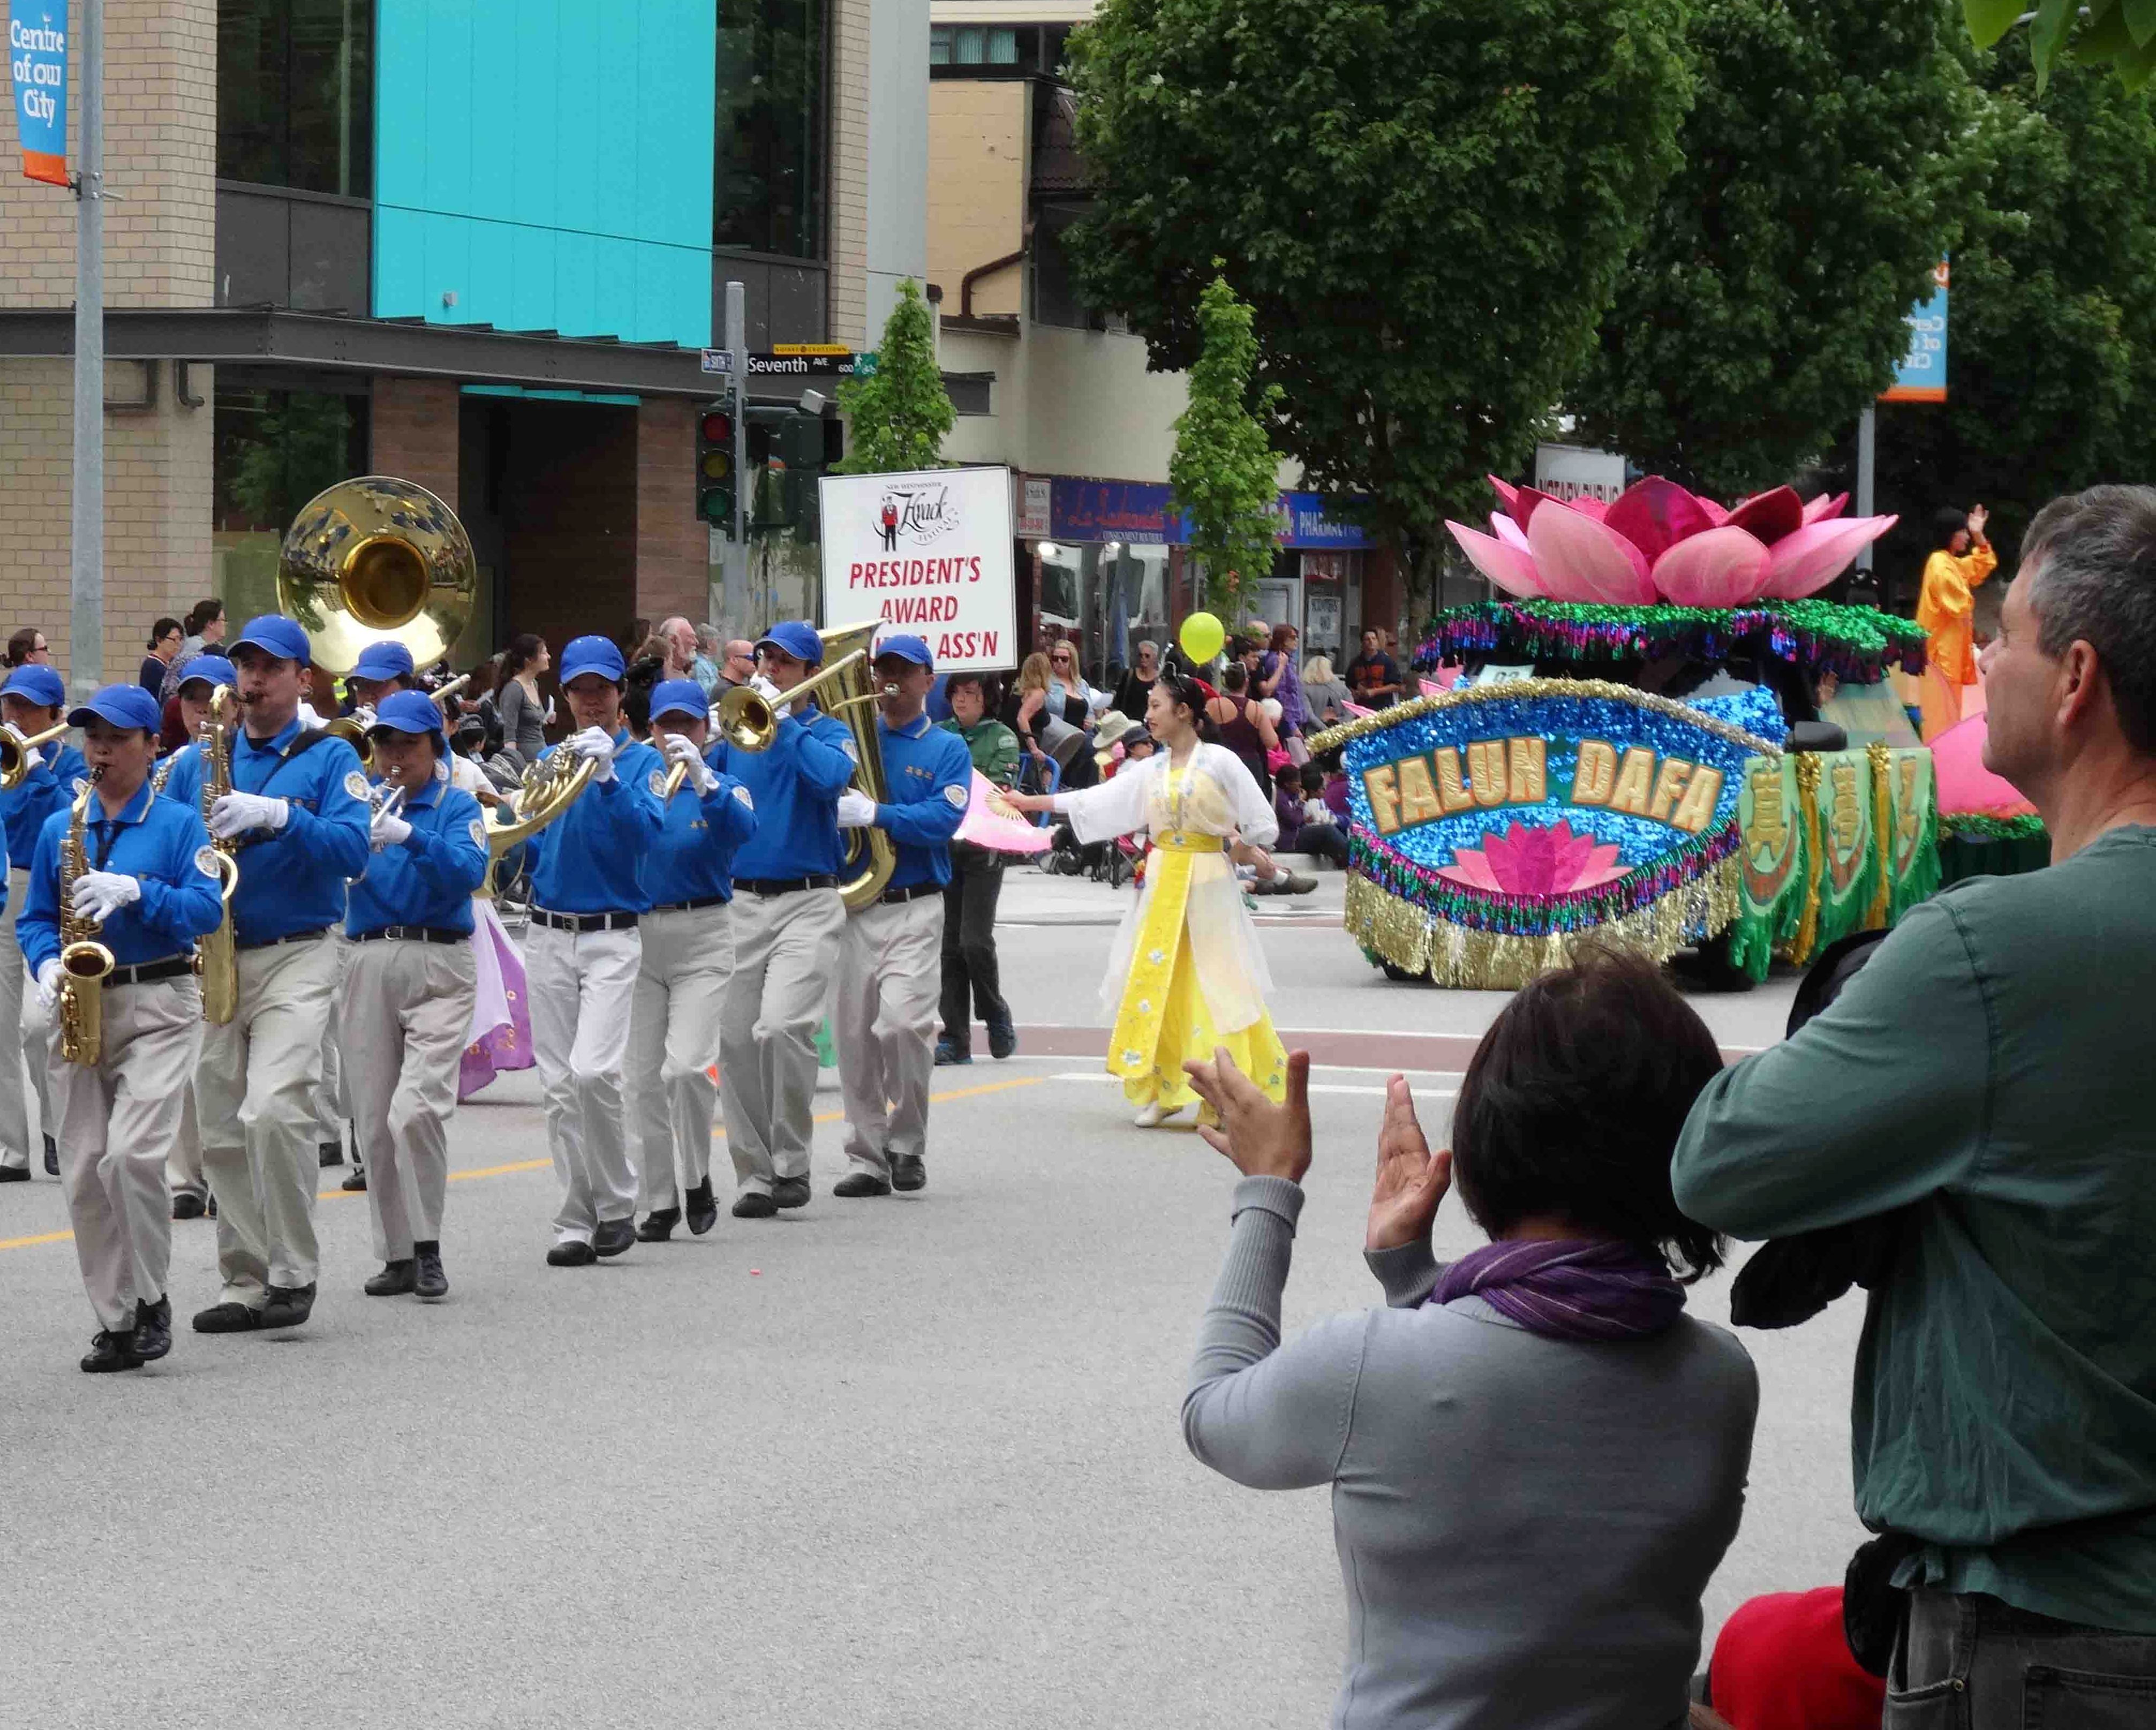 Image for article New Westminster Hyack Festival: Falun Gong Entry Wins President's Award